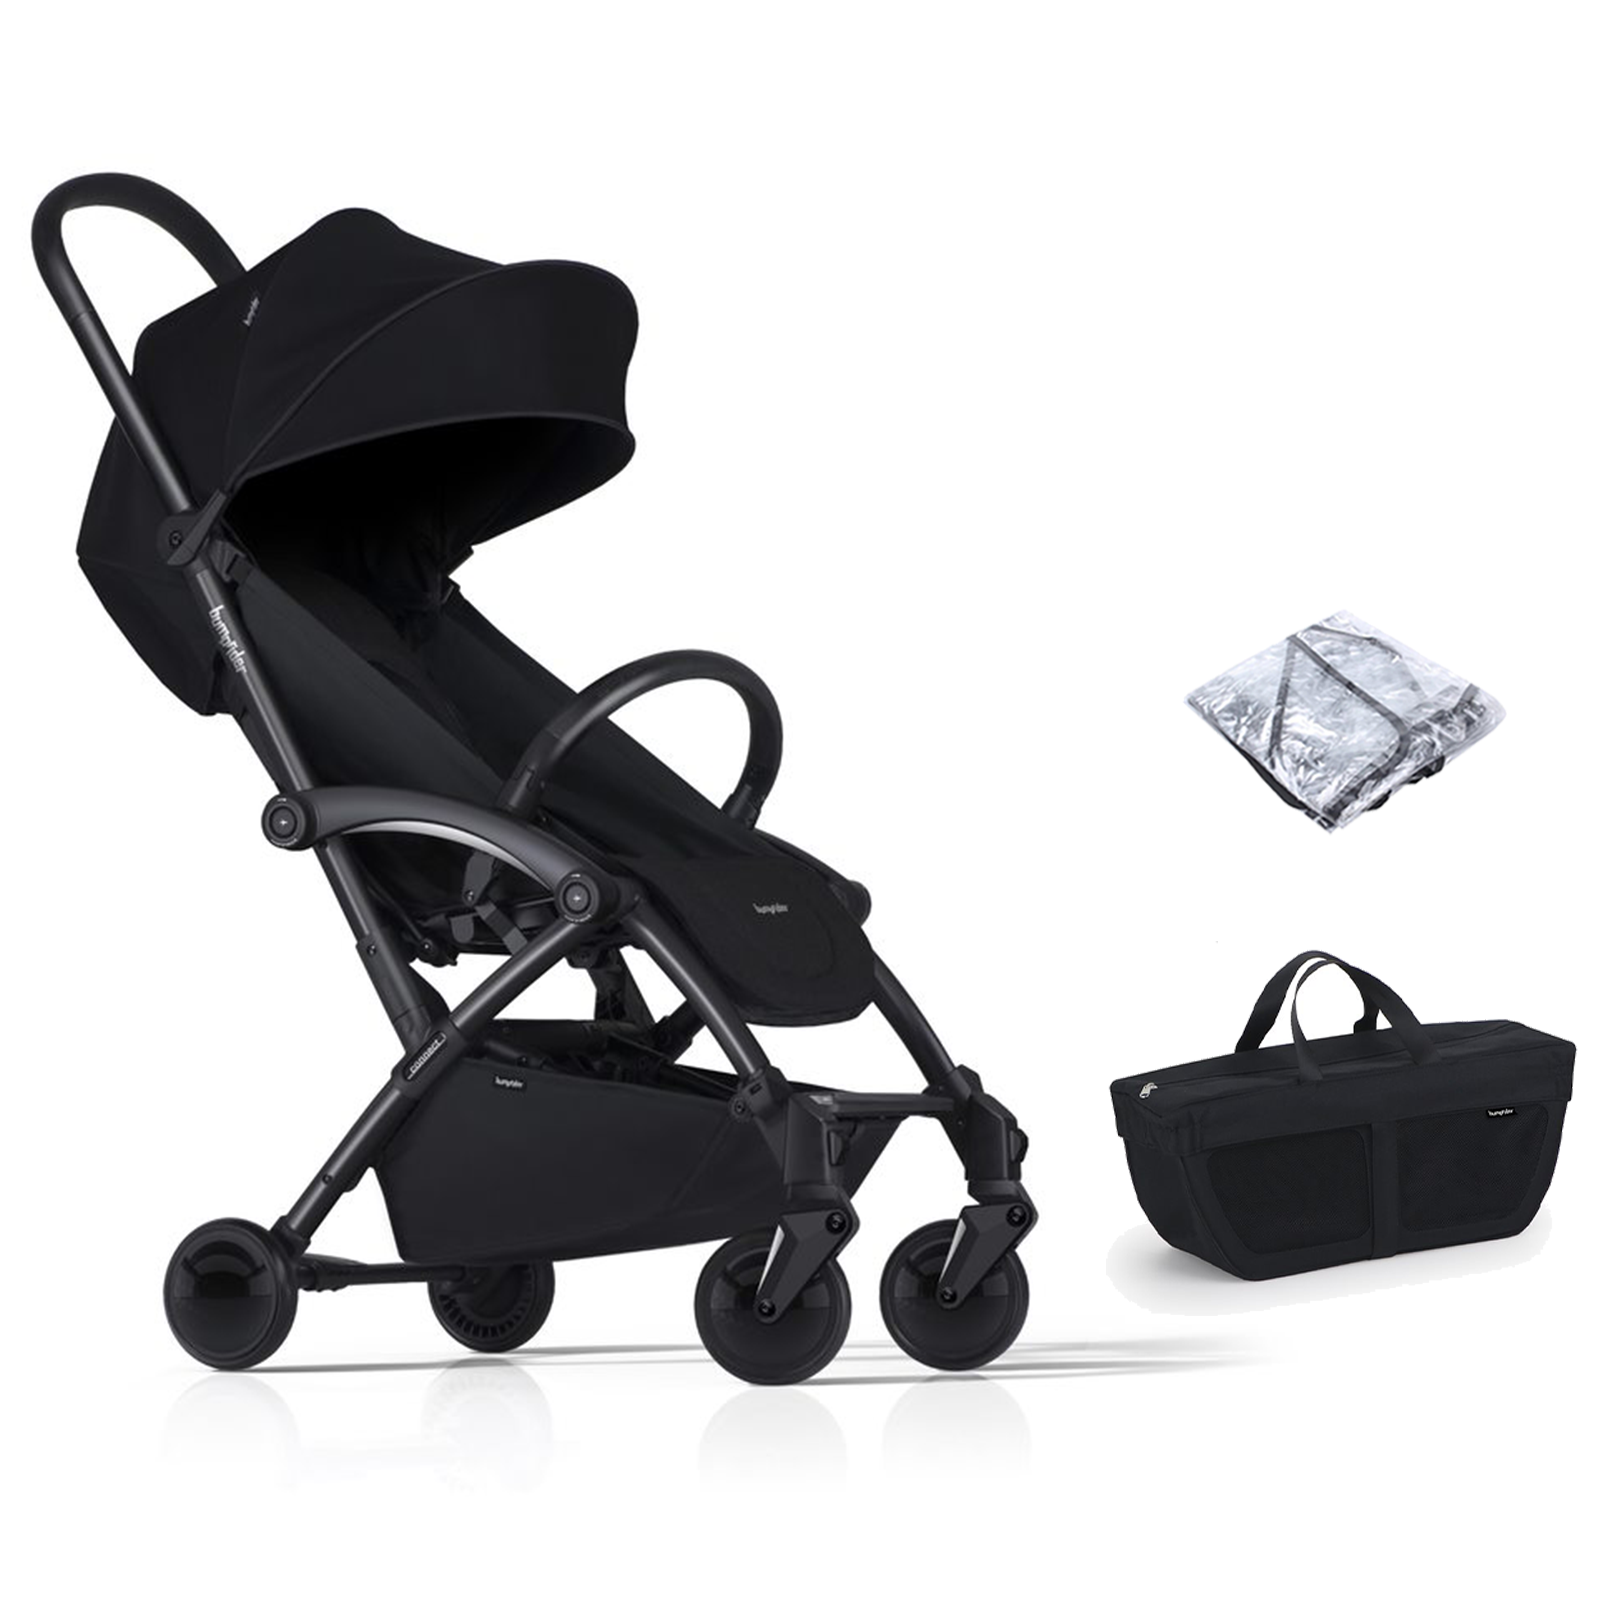 Bumprider Connect2 Stroller with Side Pack & Cover - Black